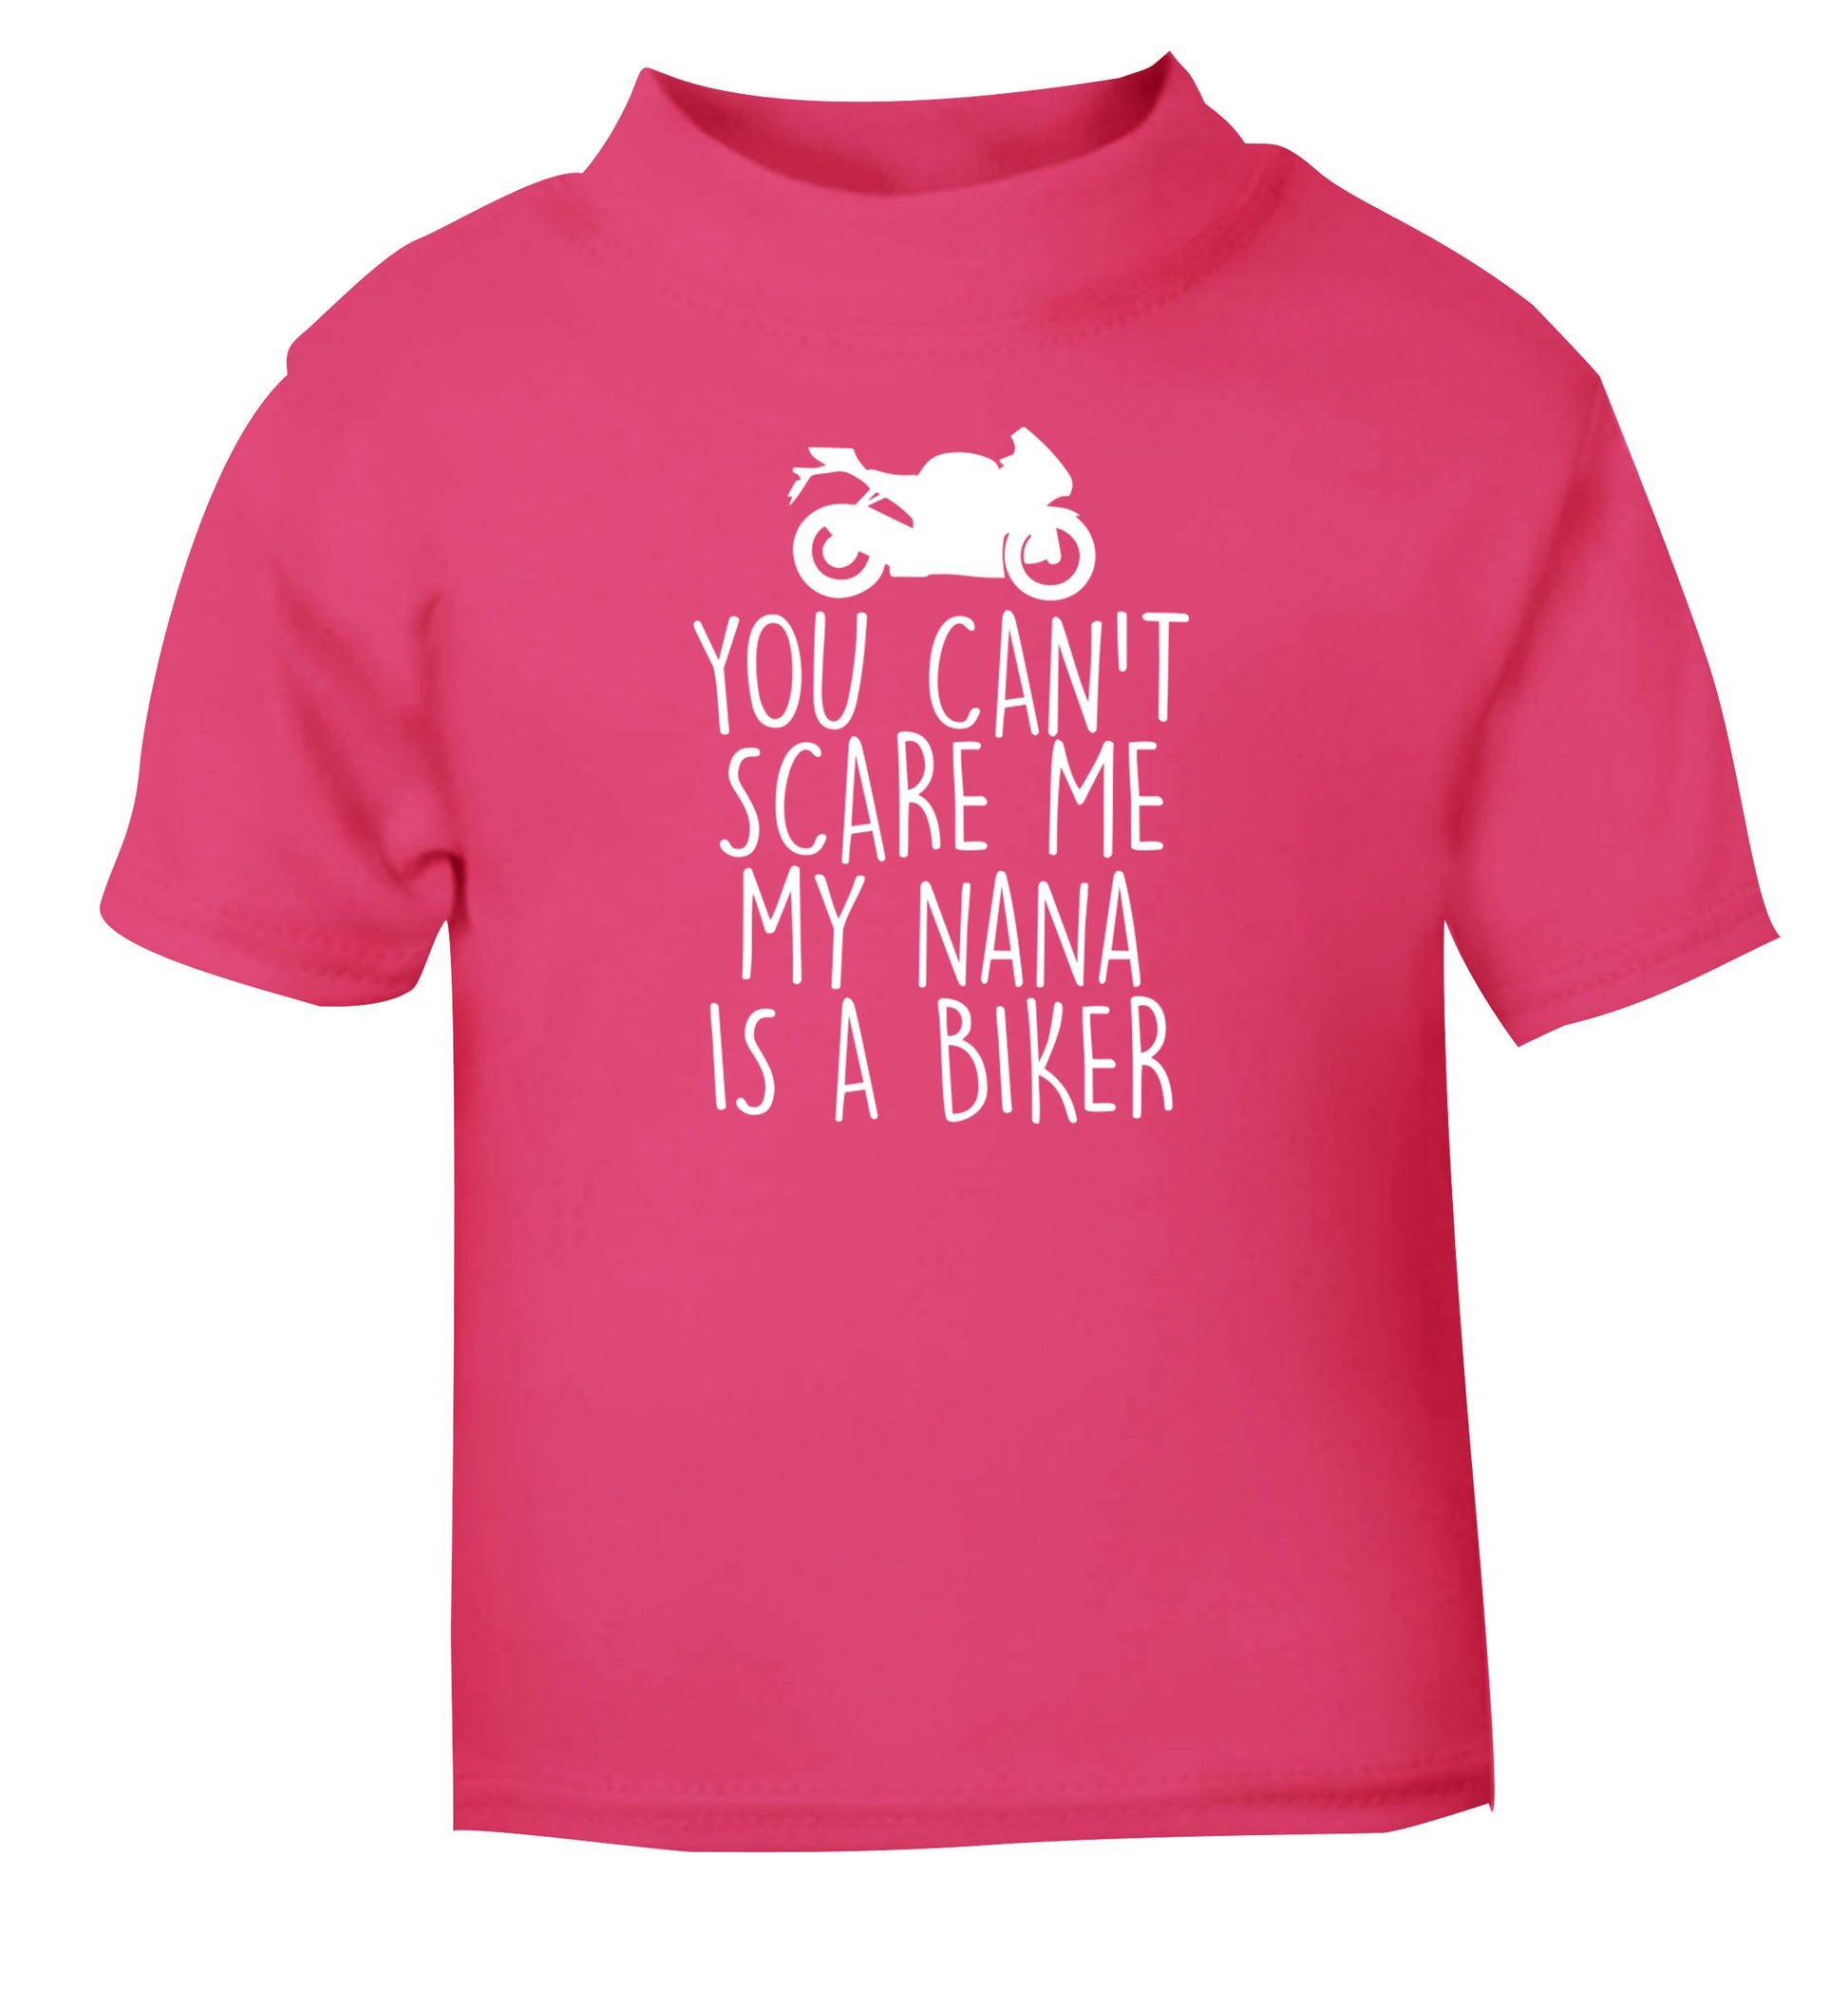 You can't scare me my nana is a biker pink Baby Toddler Tshirt 2 Years